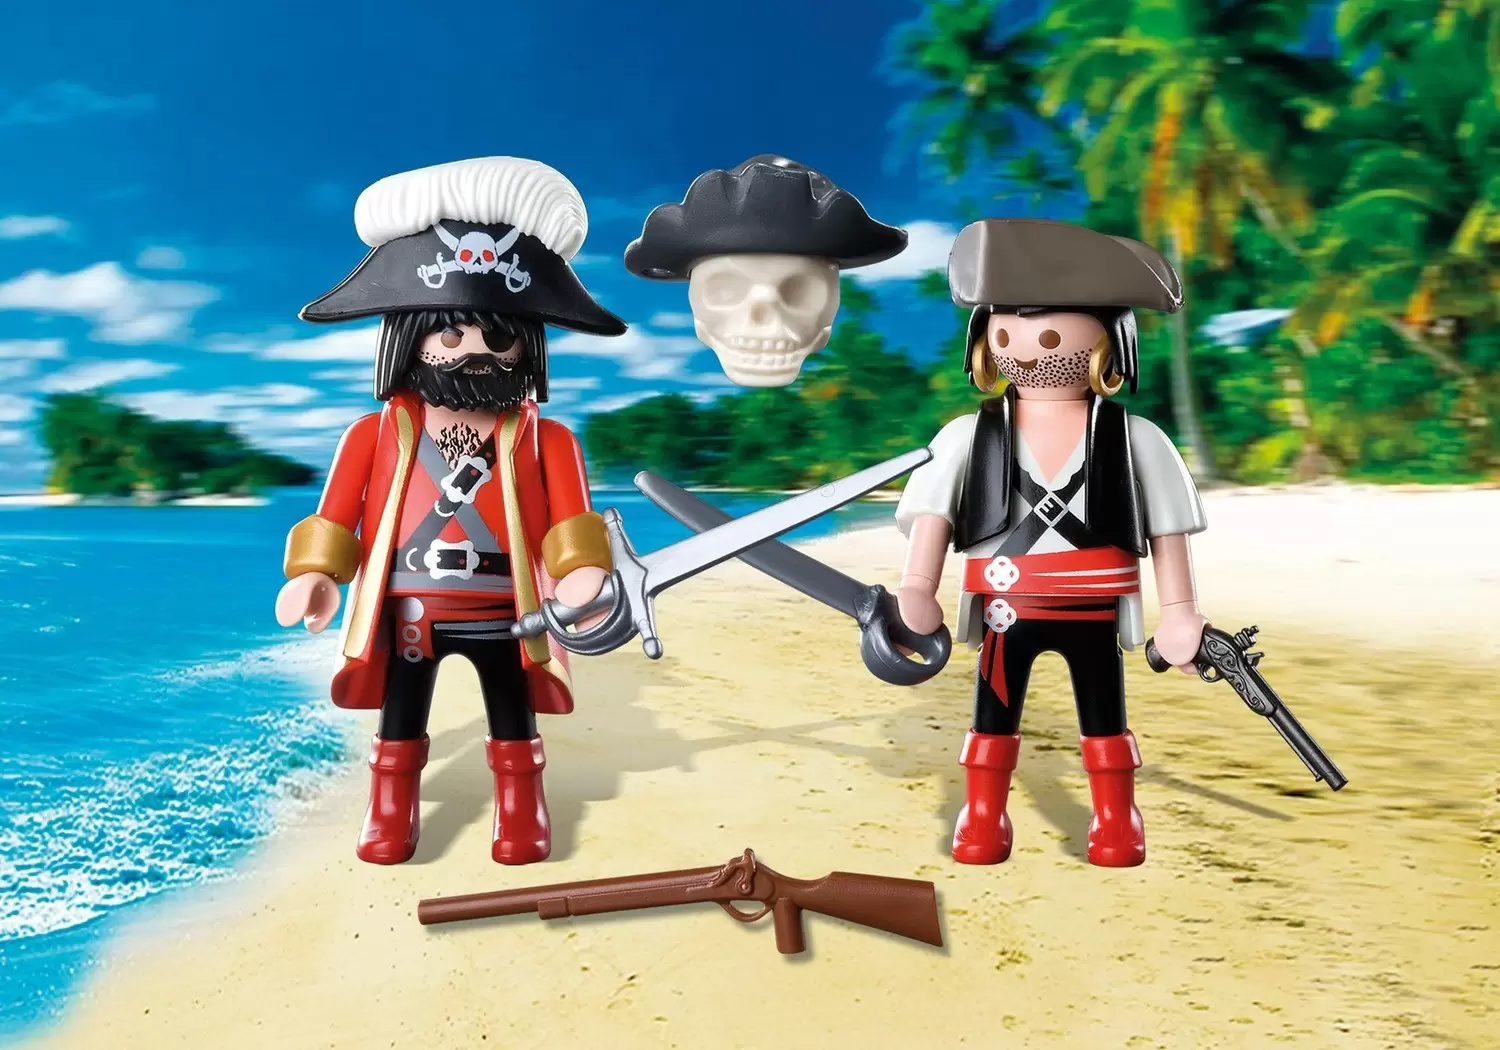 Pirate Playmobil - Pirate Duo Pack with skull